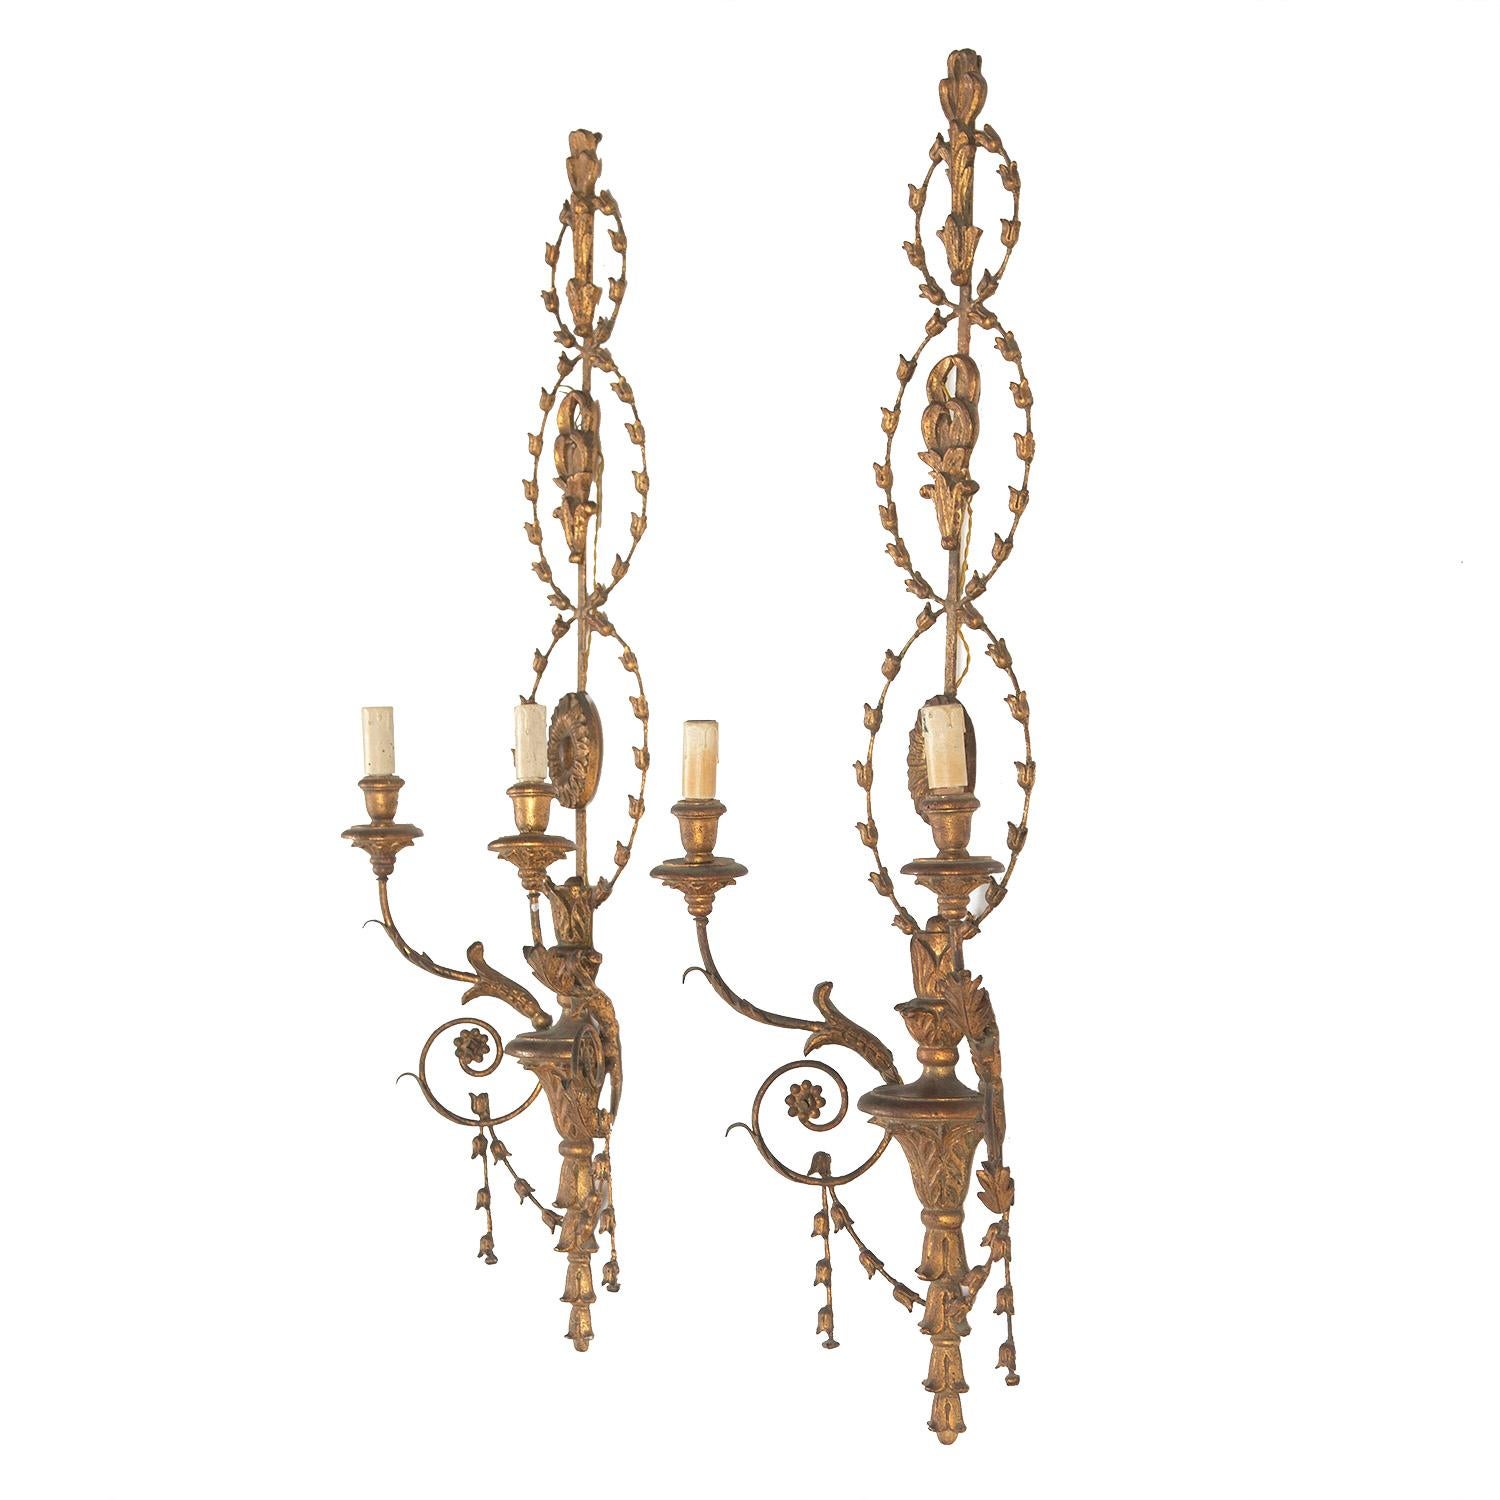 Pair of large Italian 19th century wall lights with carved gilded wood and metal. The wall lights each have two arms, and have been rewired and PAT tested to UK standards.